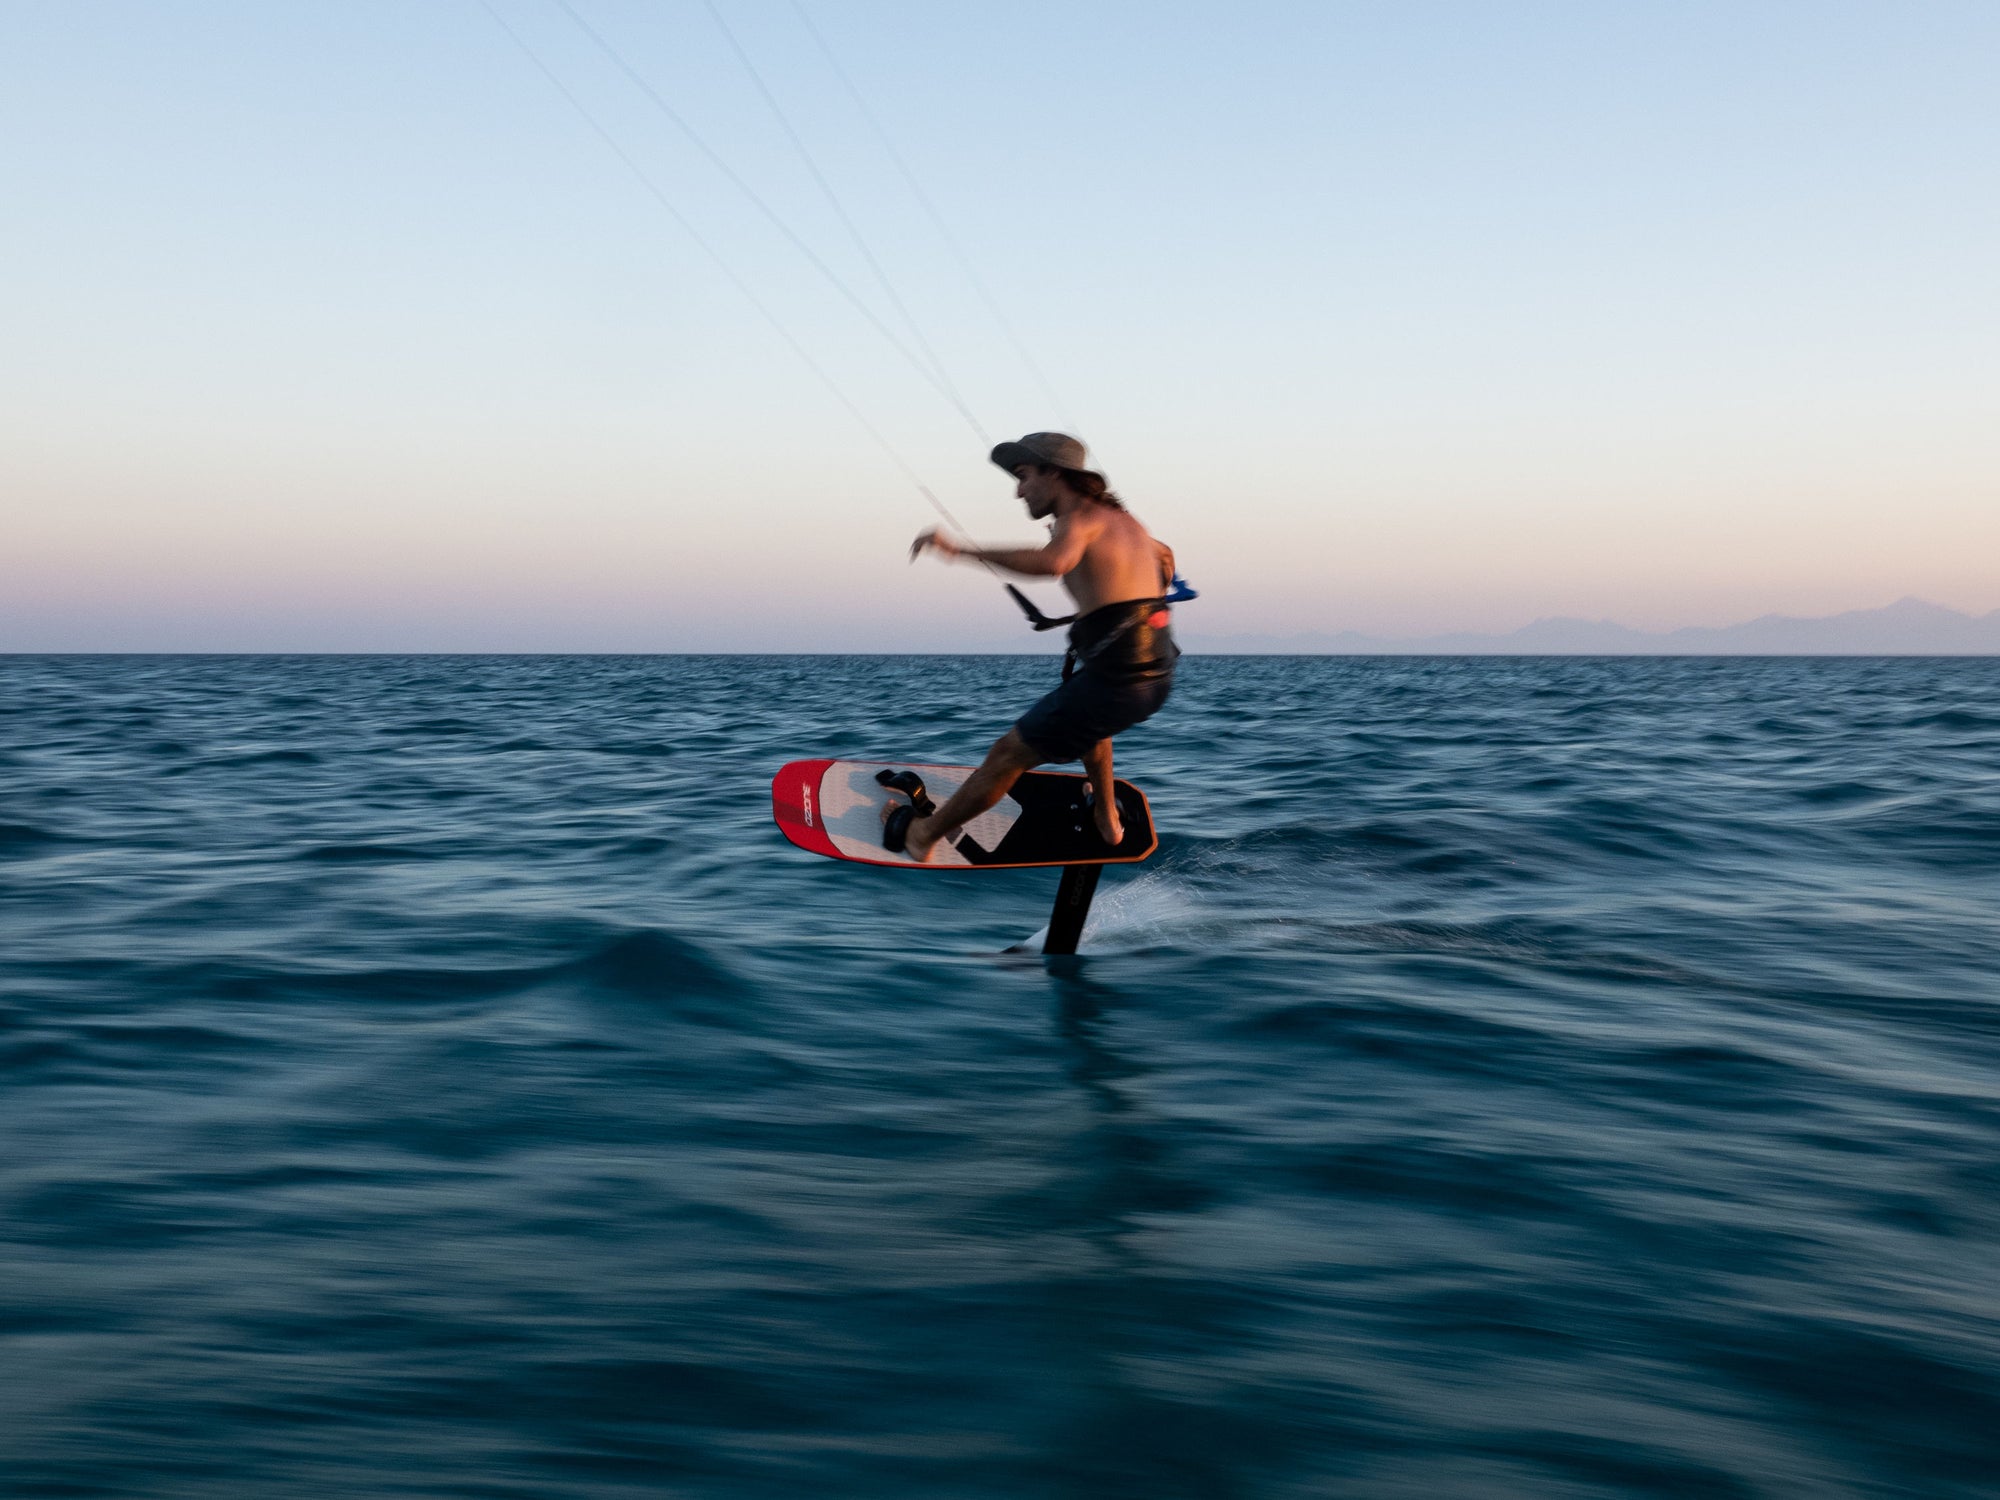 Kitesurfer foiling at sunset on the Ozone Apex V1 foil and board.